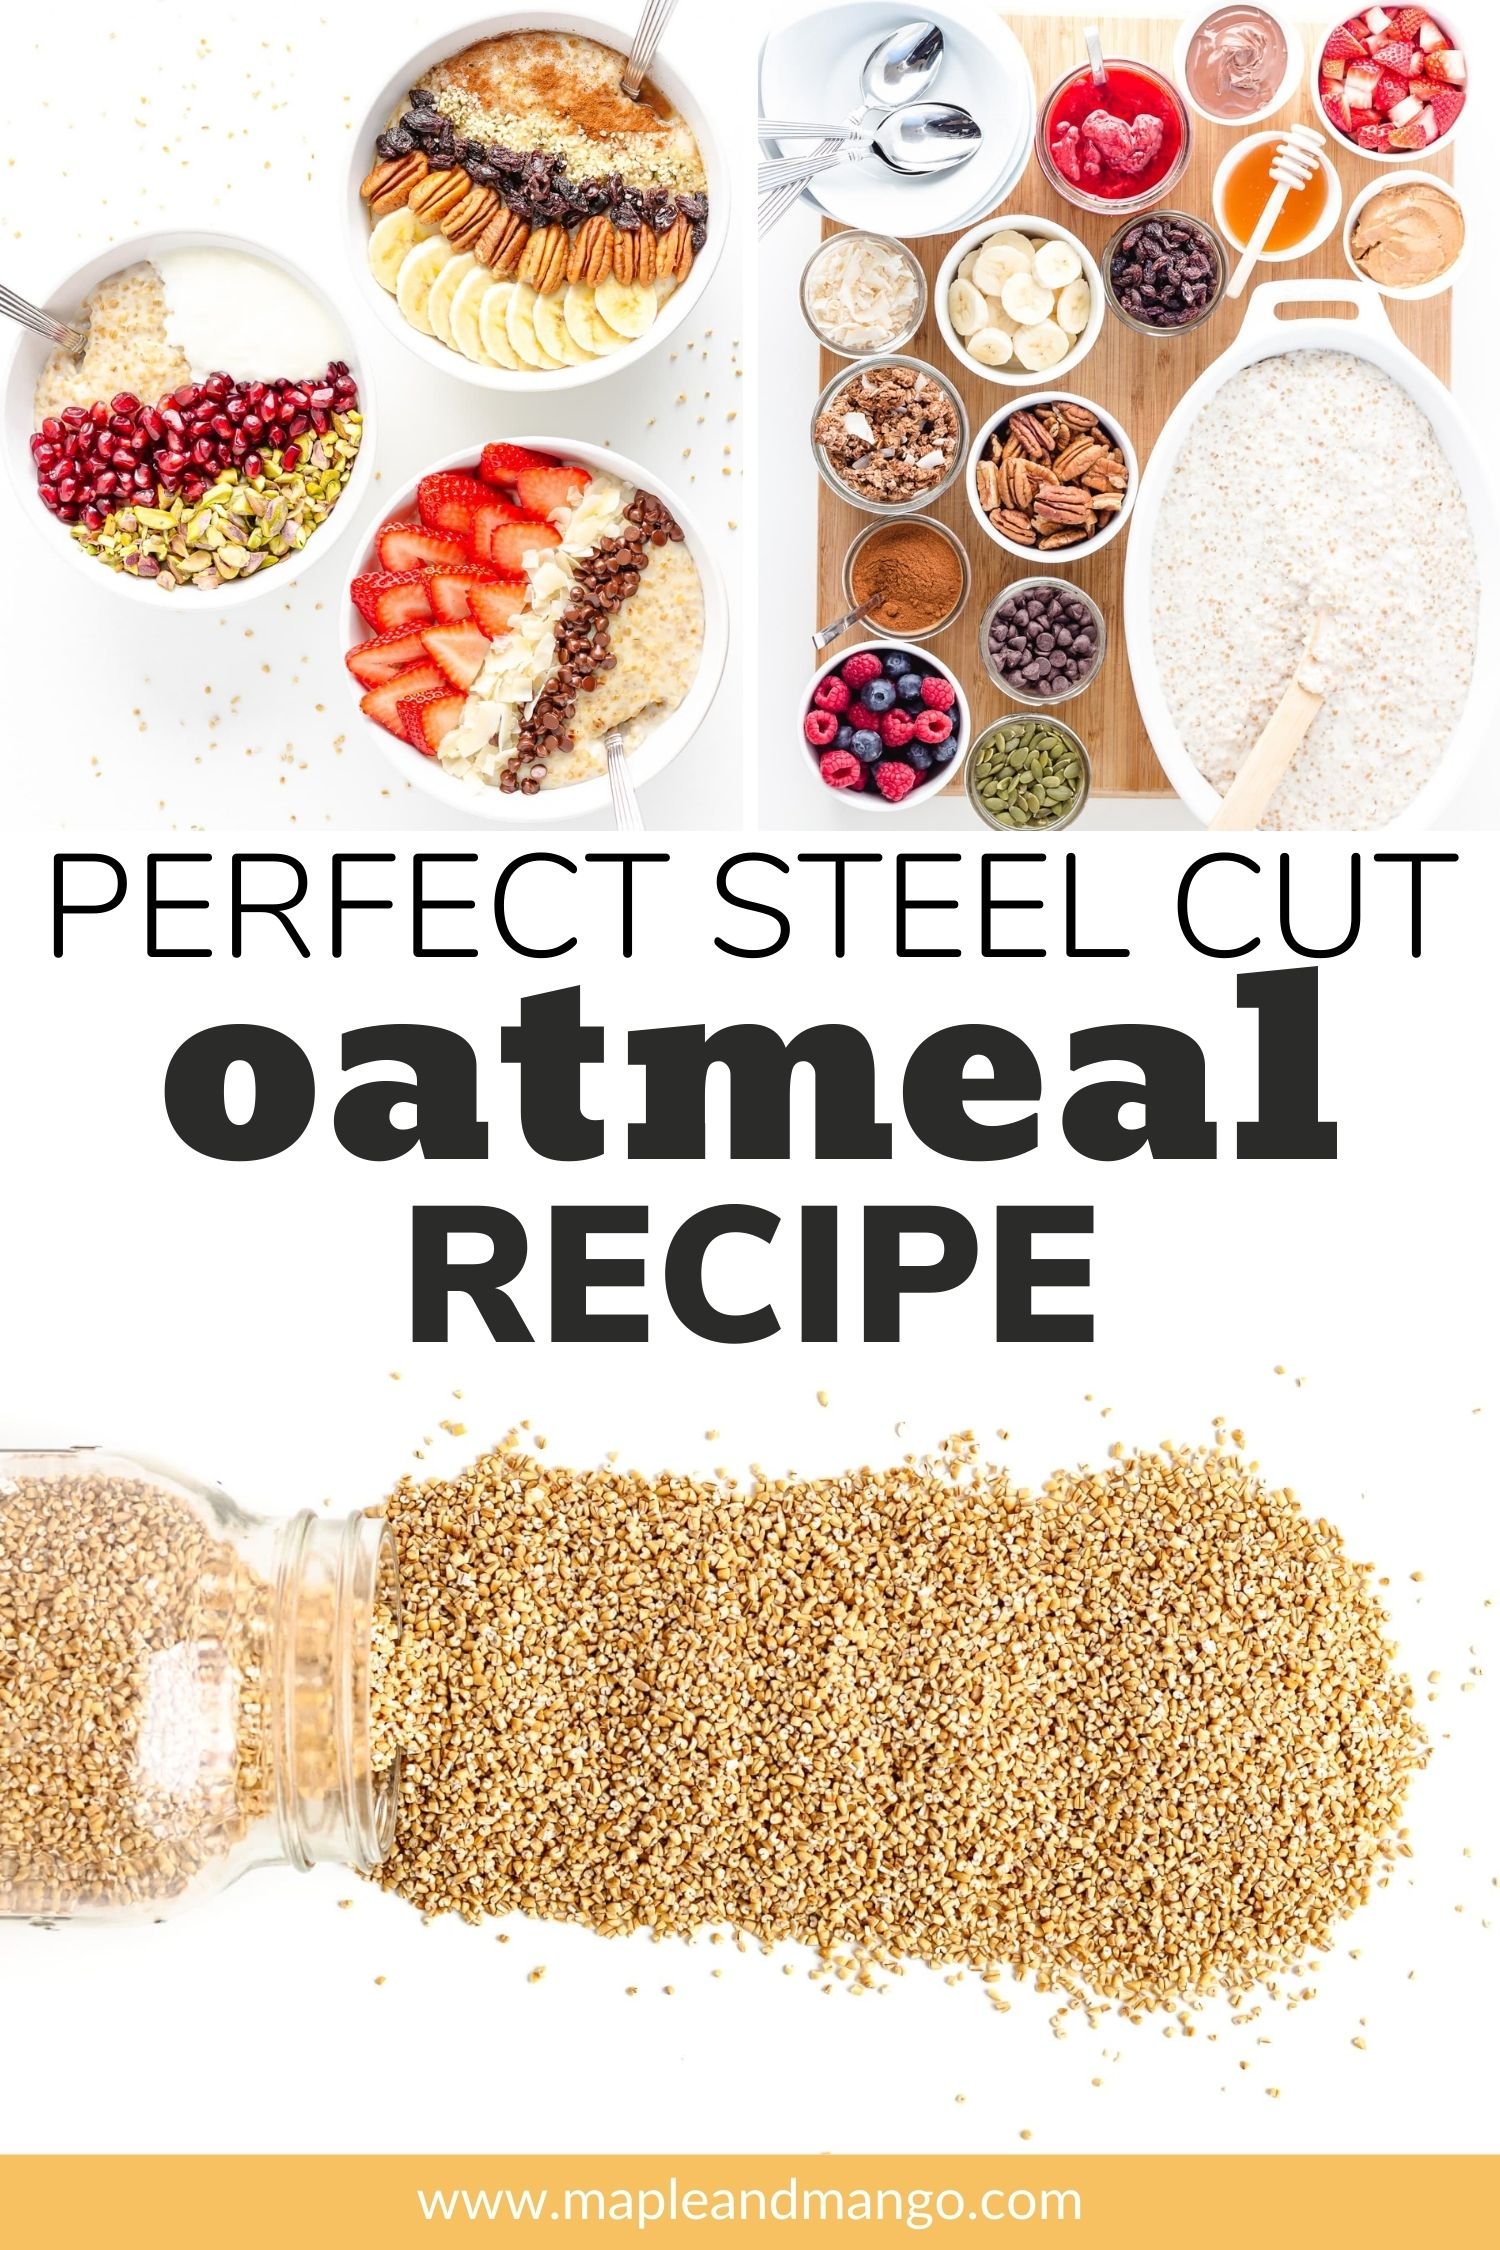 Photo collage graphic of different oatmeal pictures with text overlay "Perfect Steel Cut Oatmeal Recipe".